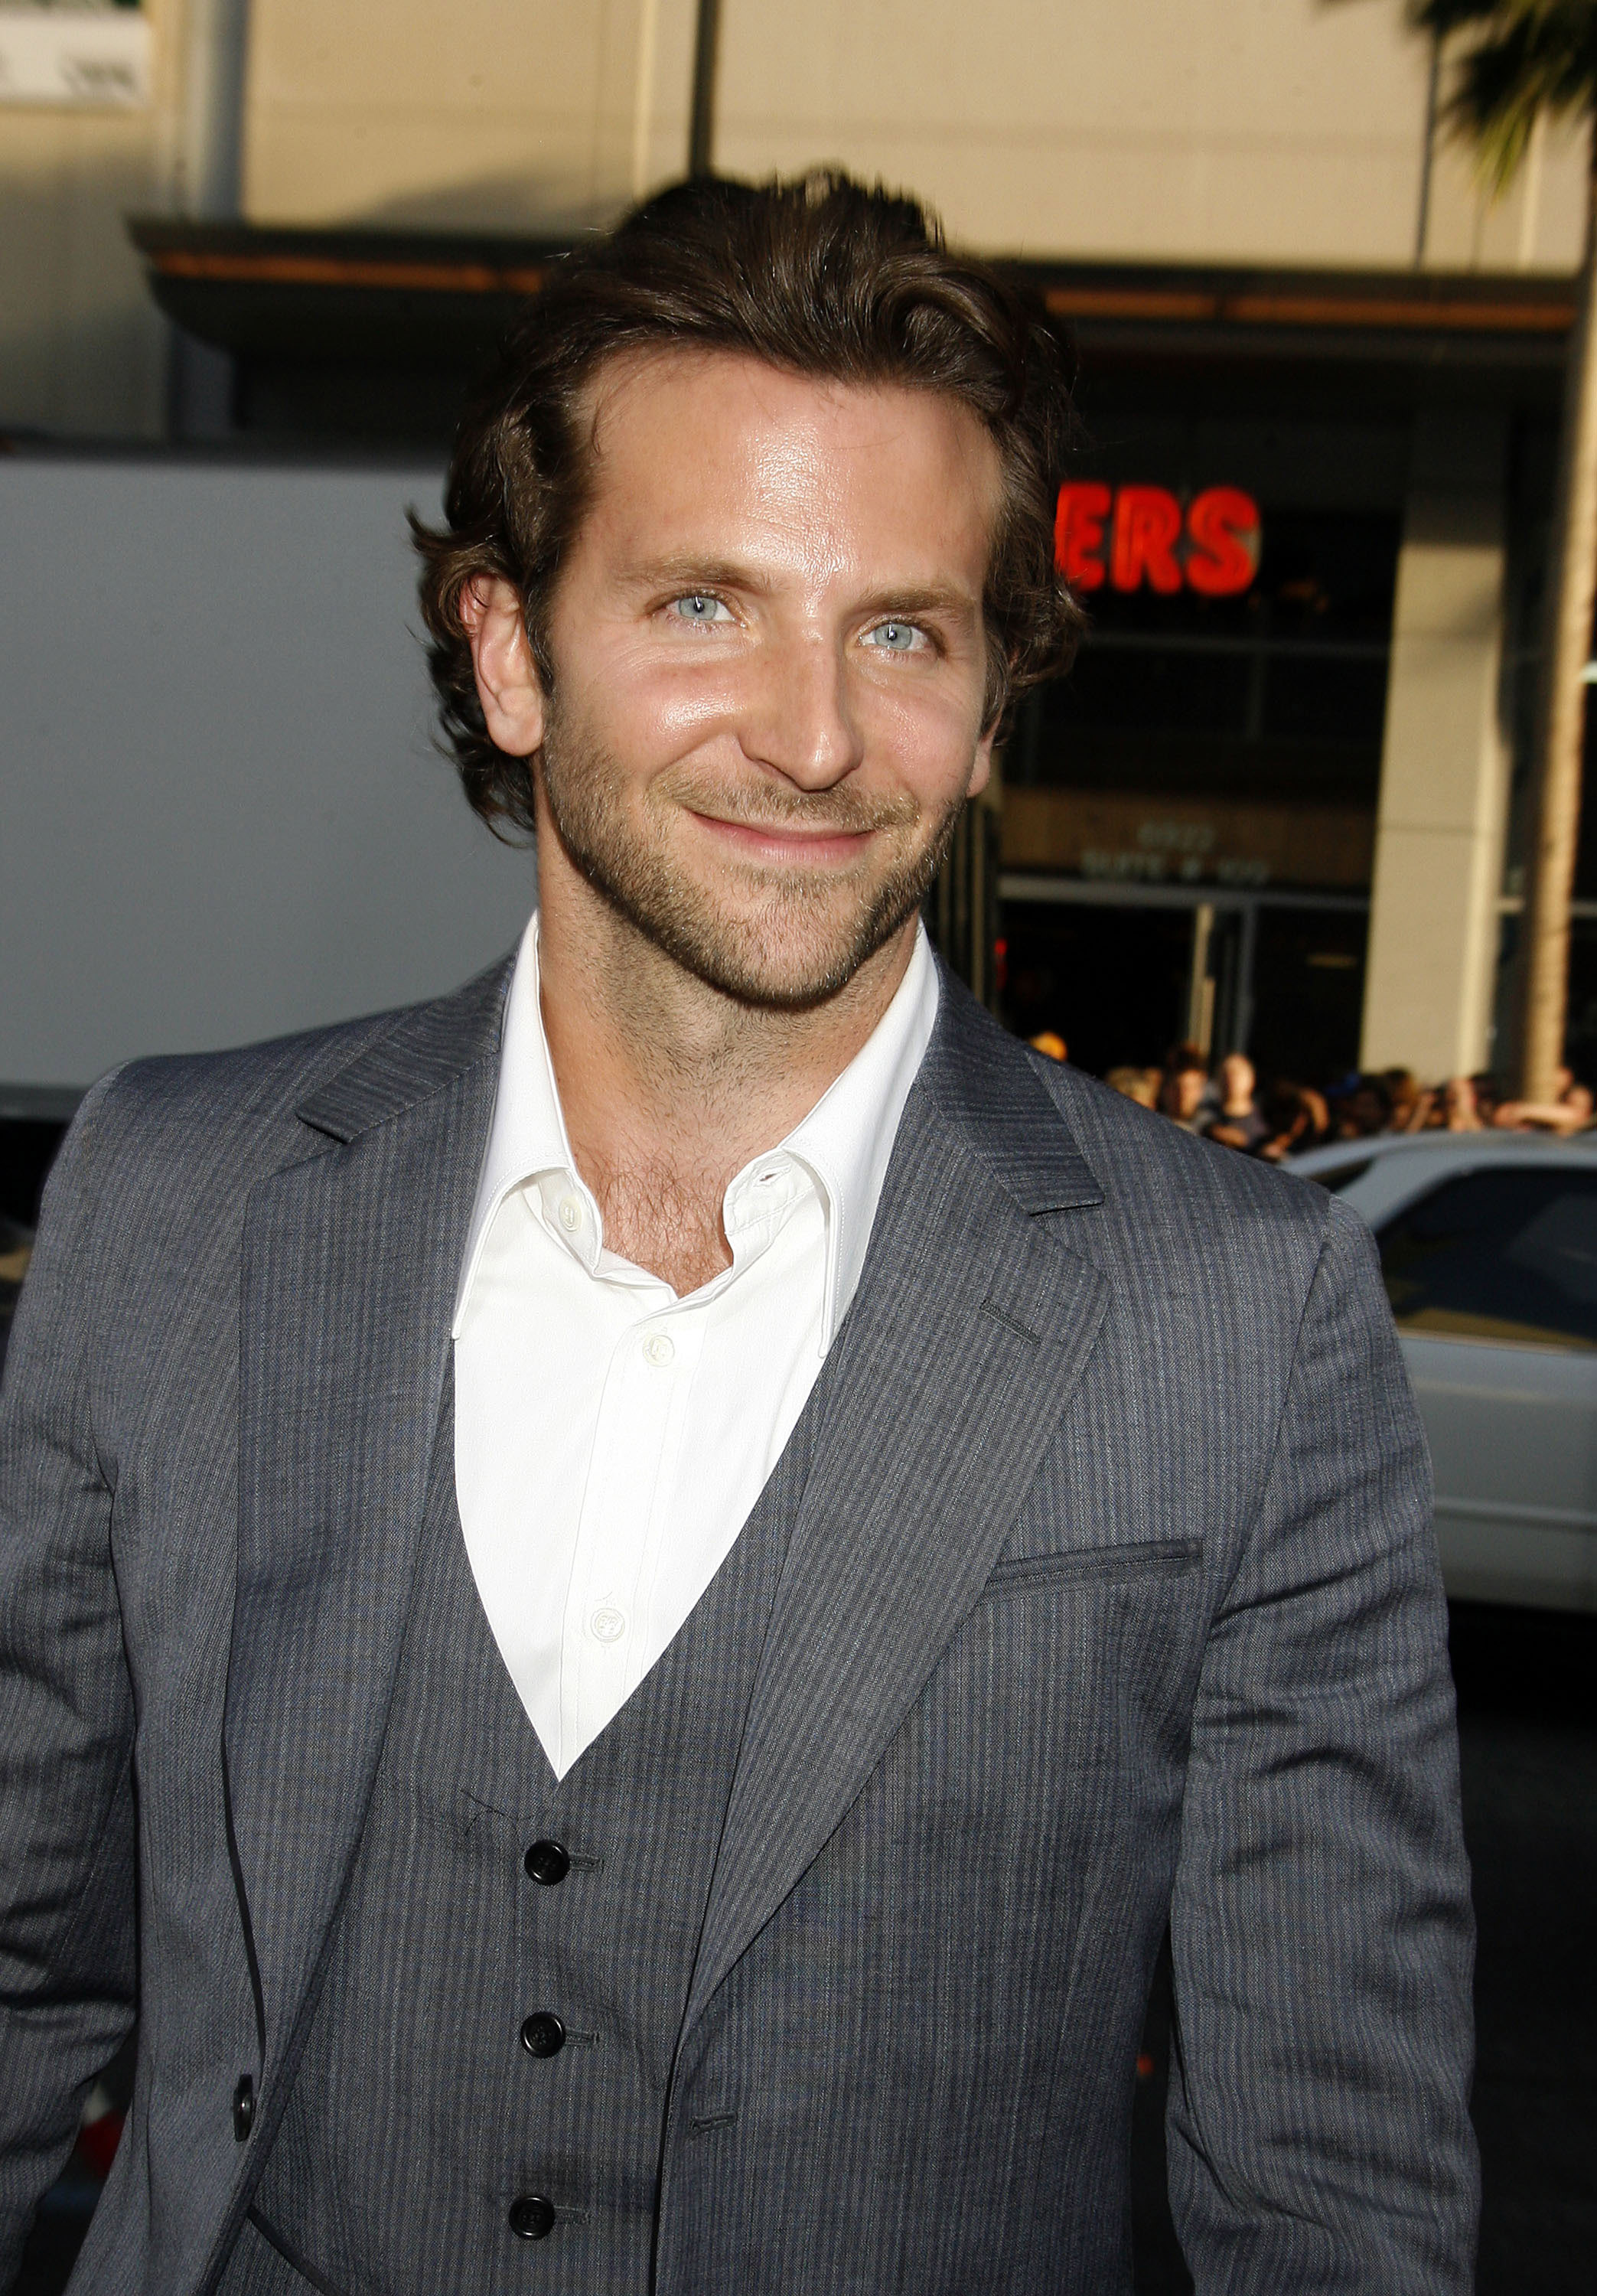 Bradley Cooper at the premiere of "The Hangover" in Hollywood, California on June 2, 2009 | Source: Getty Images